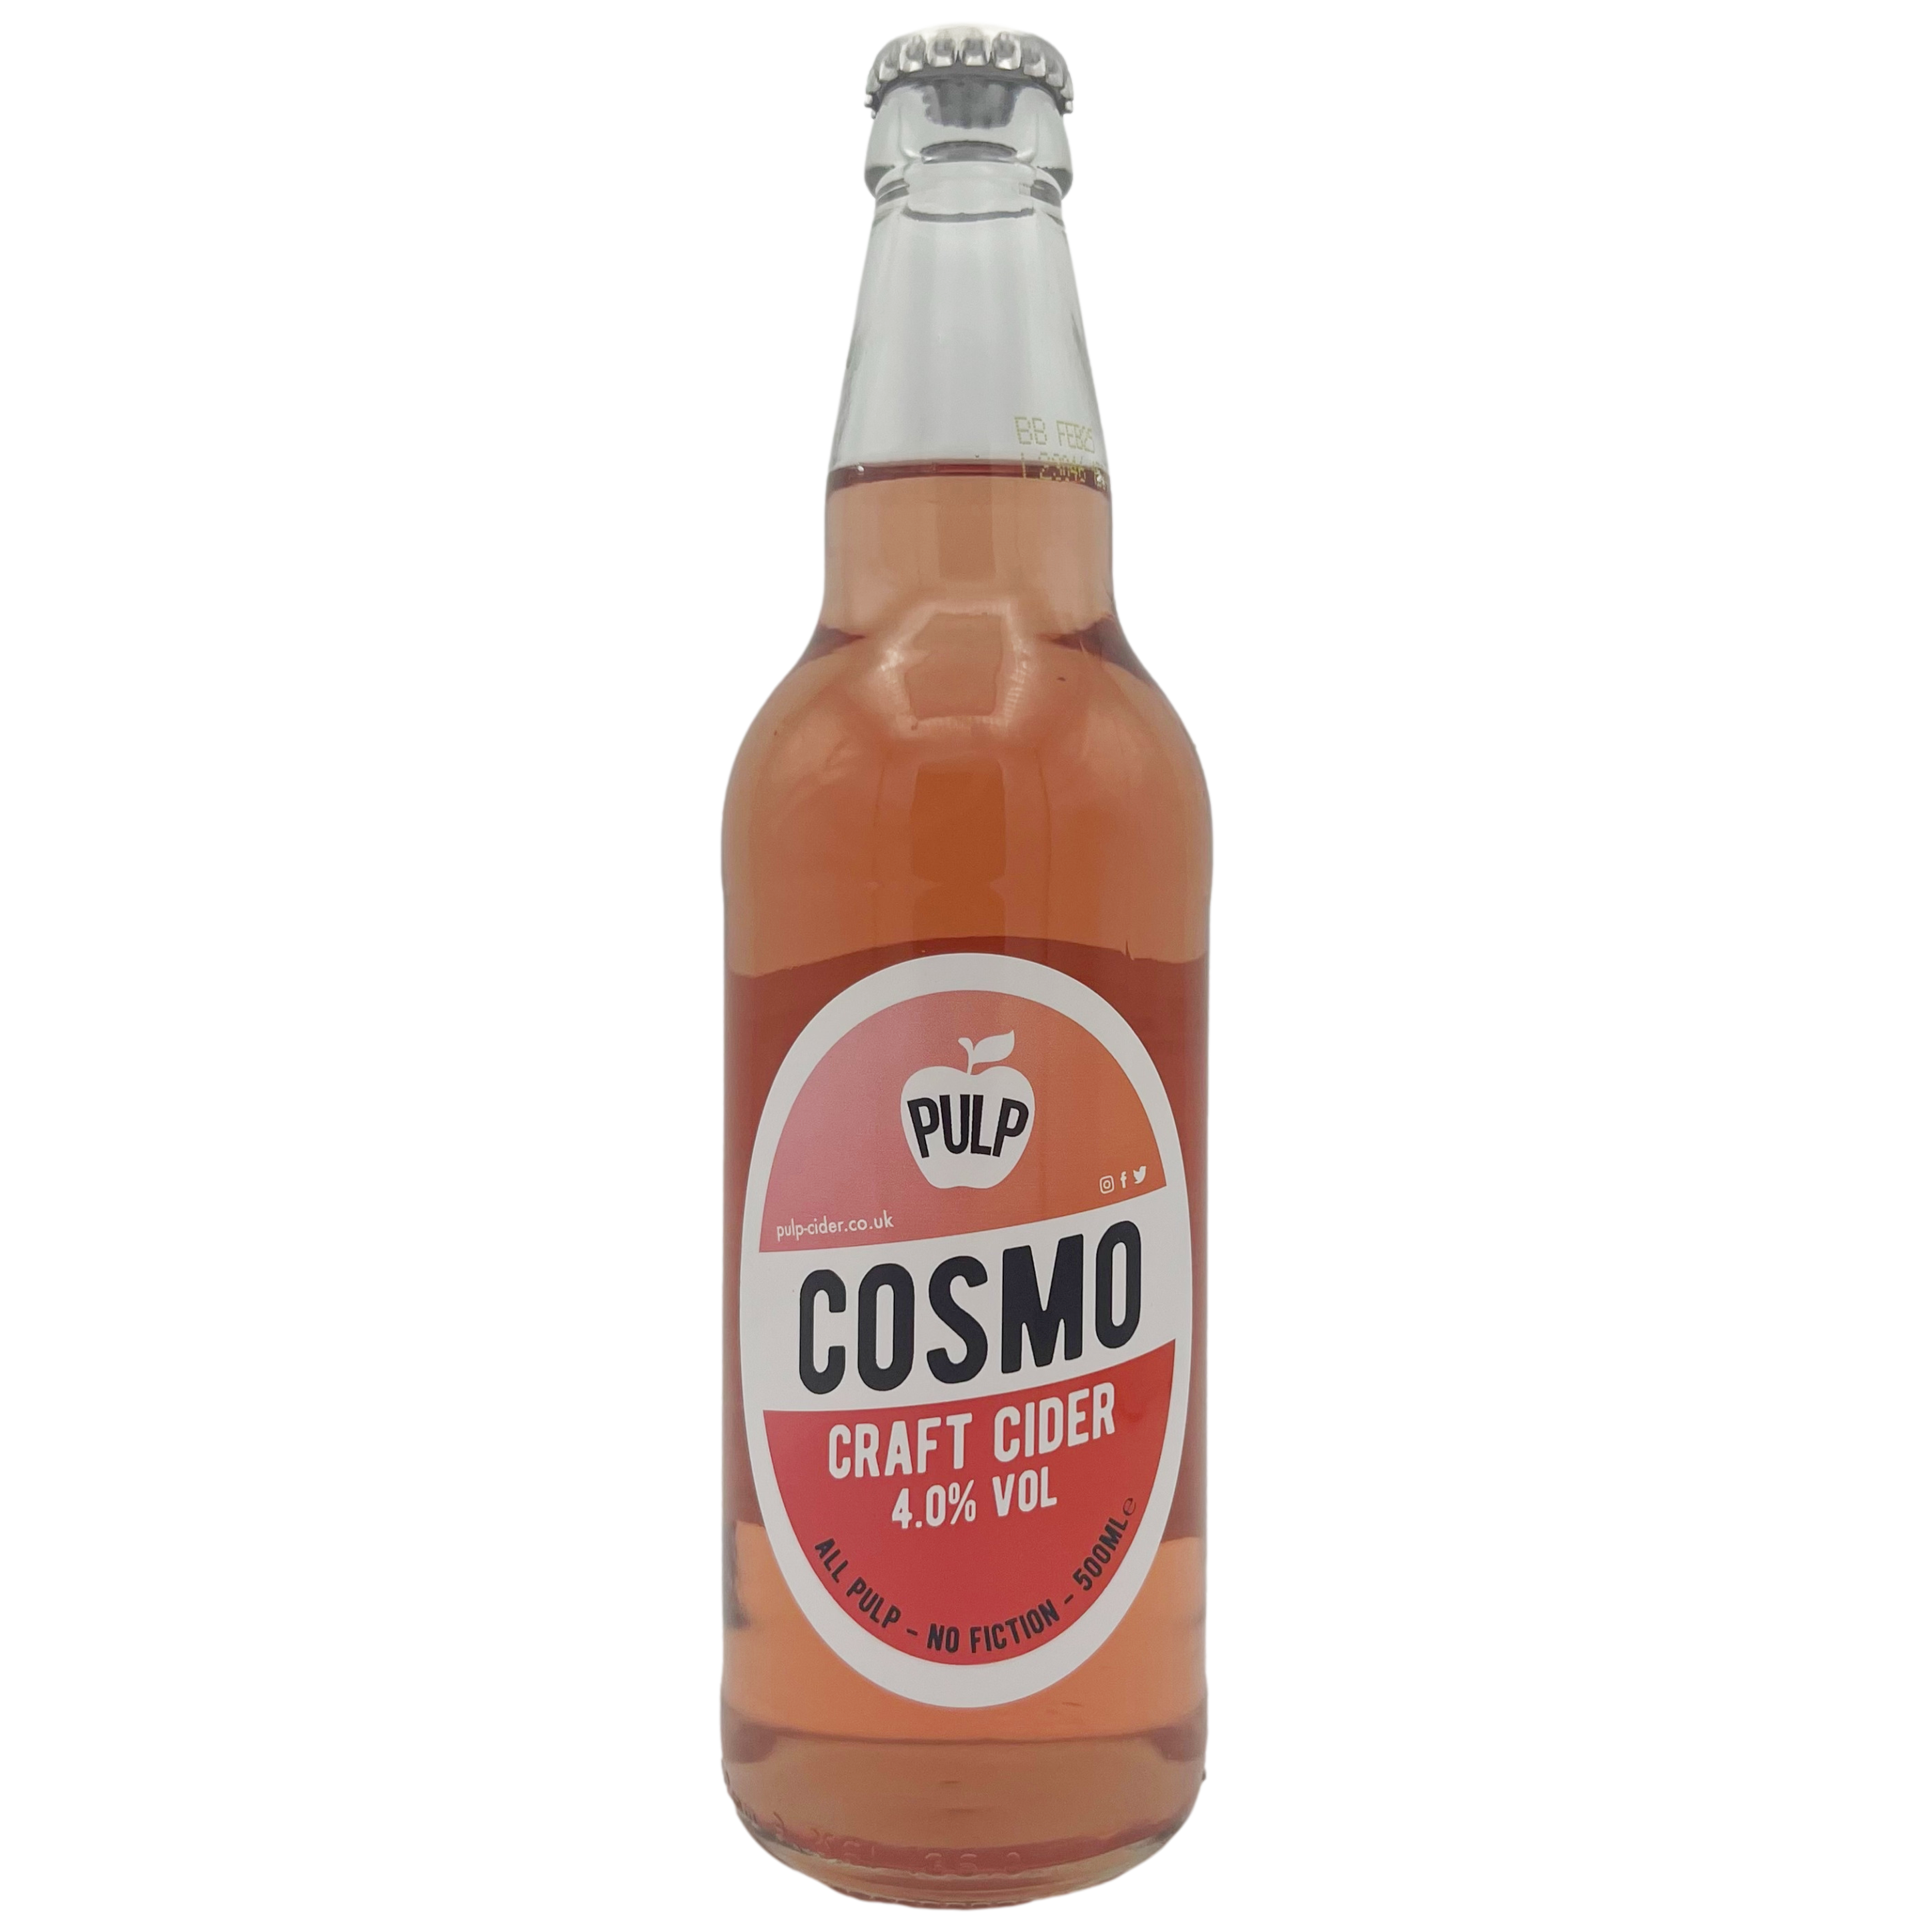 cosmo by pulp cider